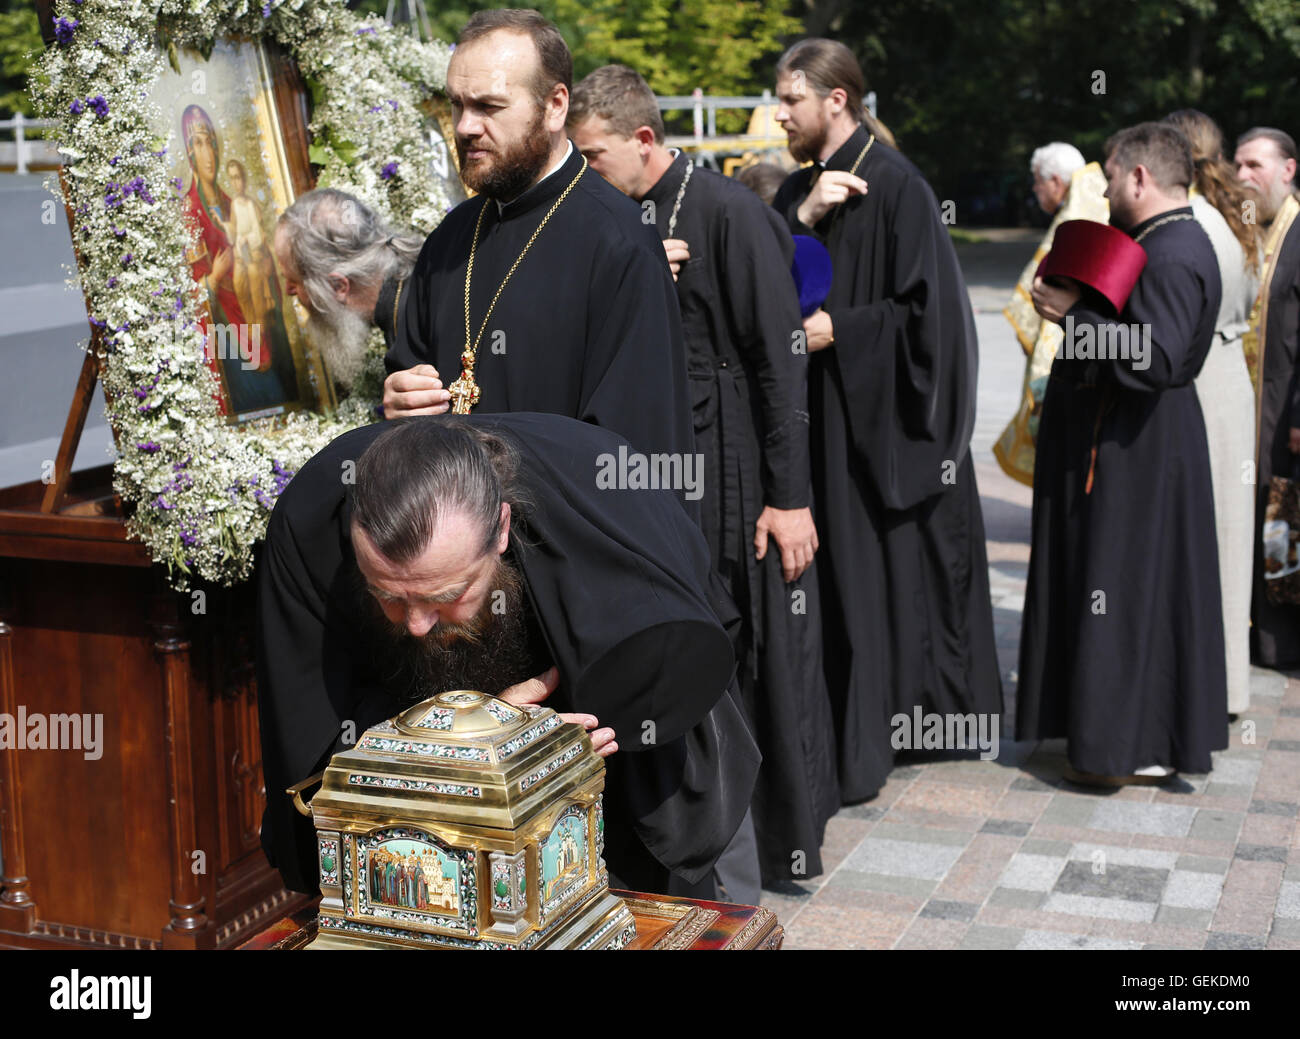 Kiev, Ukraine. 27th July, 2016. Orthodox priest of Moscow Patriarchy bows relics at a prayer ceremony at the St. 27th July, 2016. Vladimir's Hill, marking the 1028th anniversary of the Baptism of Kievan Rus in Kiev on July 27, 2016. Credit:  Anatolii Stepanov/ZUMA Wire/Alamy Live News Stock Photo